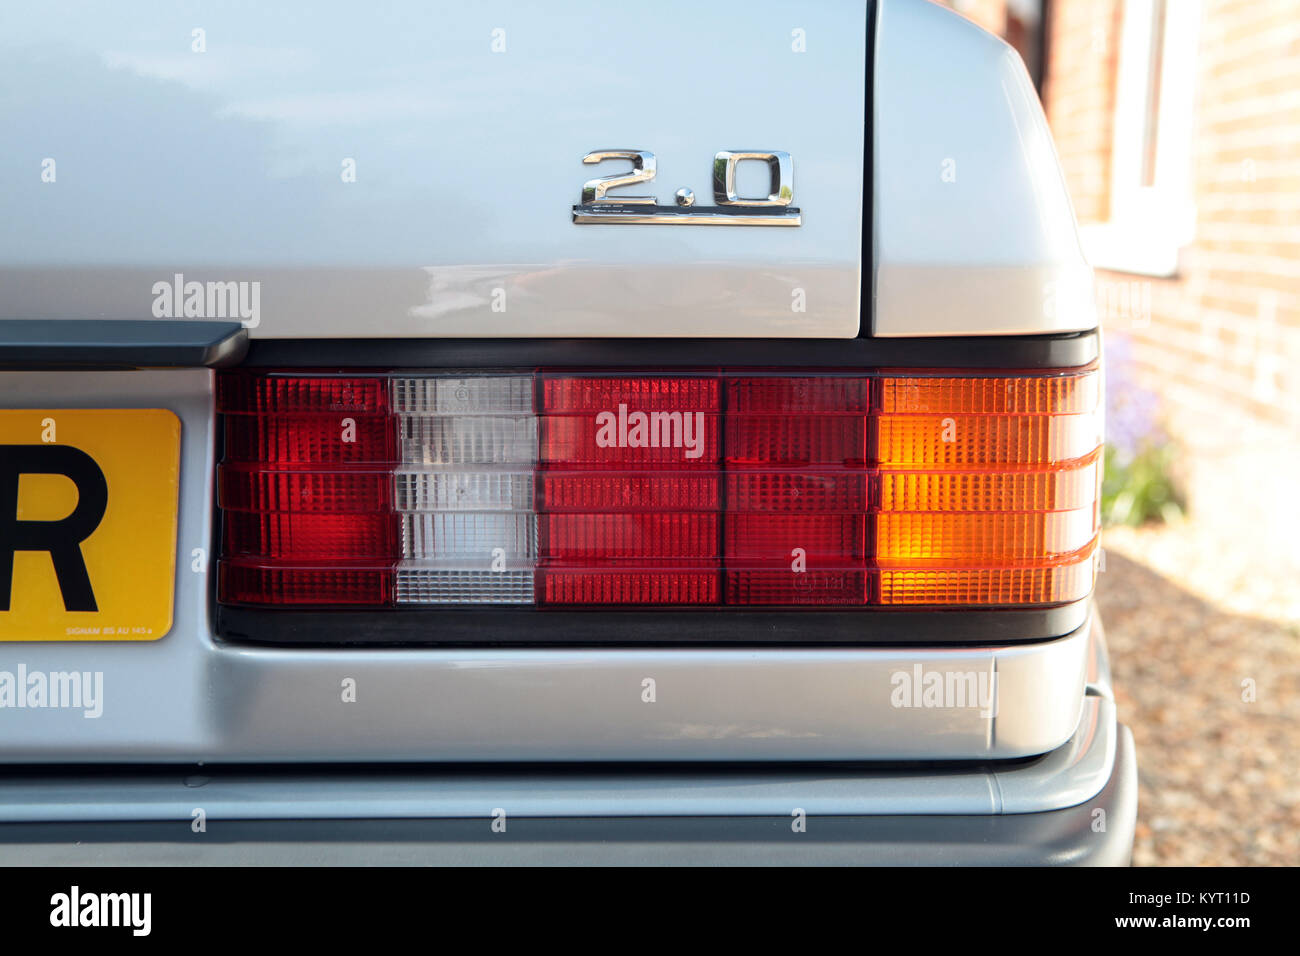 An immaculate example of a 1993 Mercedes Benz 190e. Close up detailed image of rear light cluster. UK 2017. Stock Photo